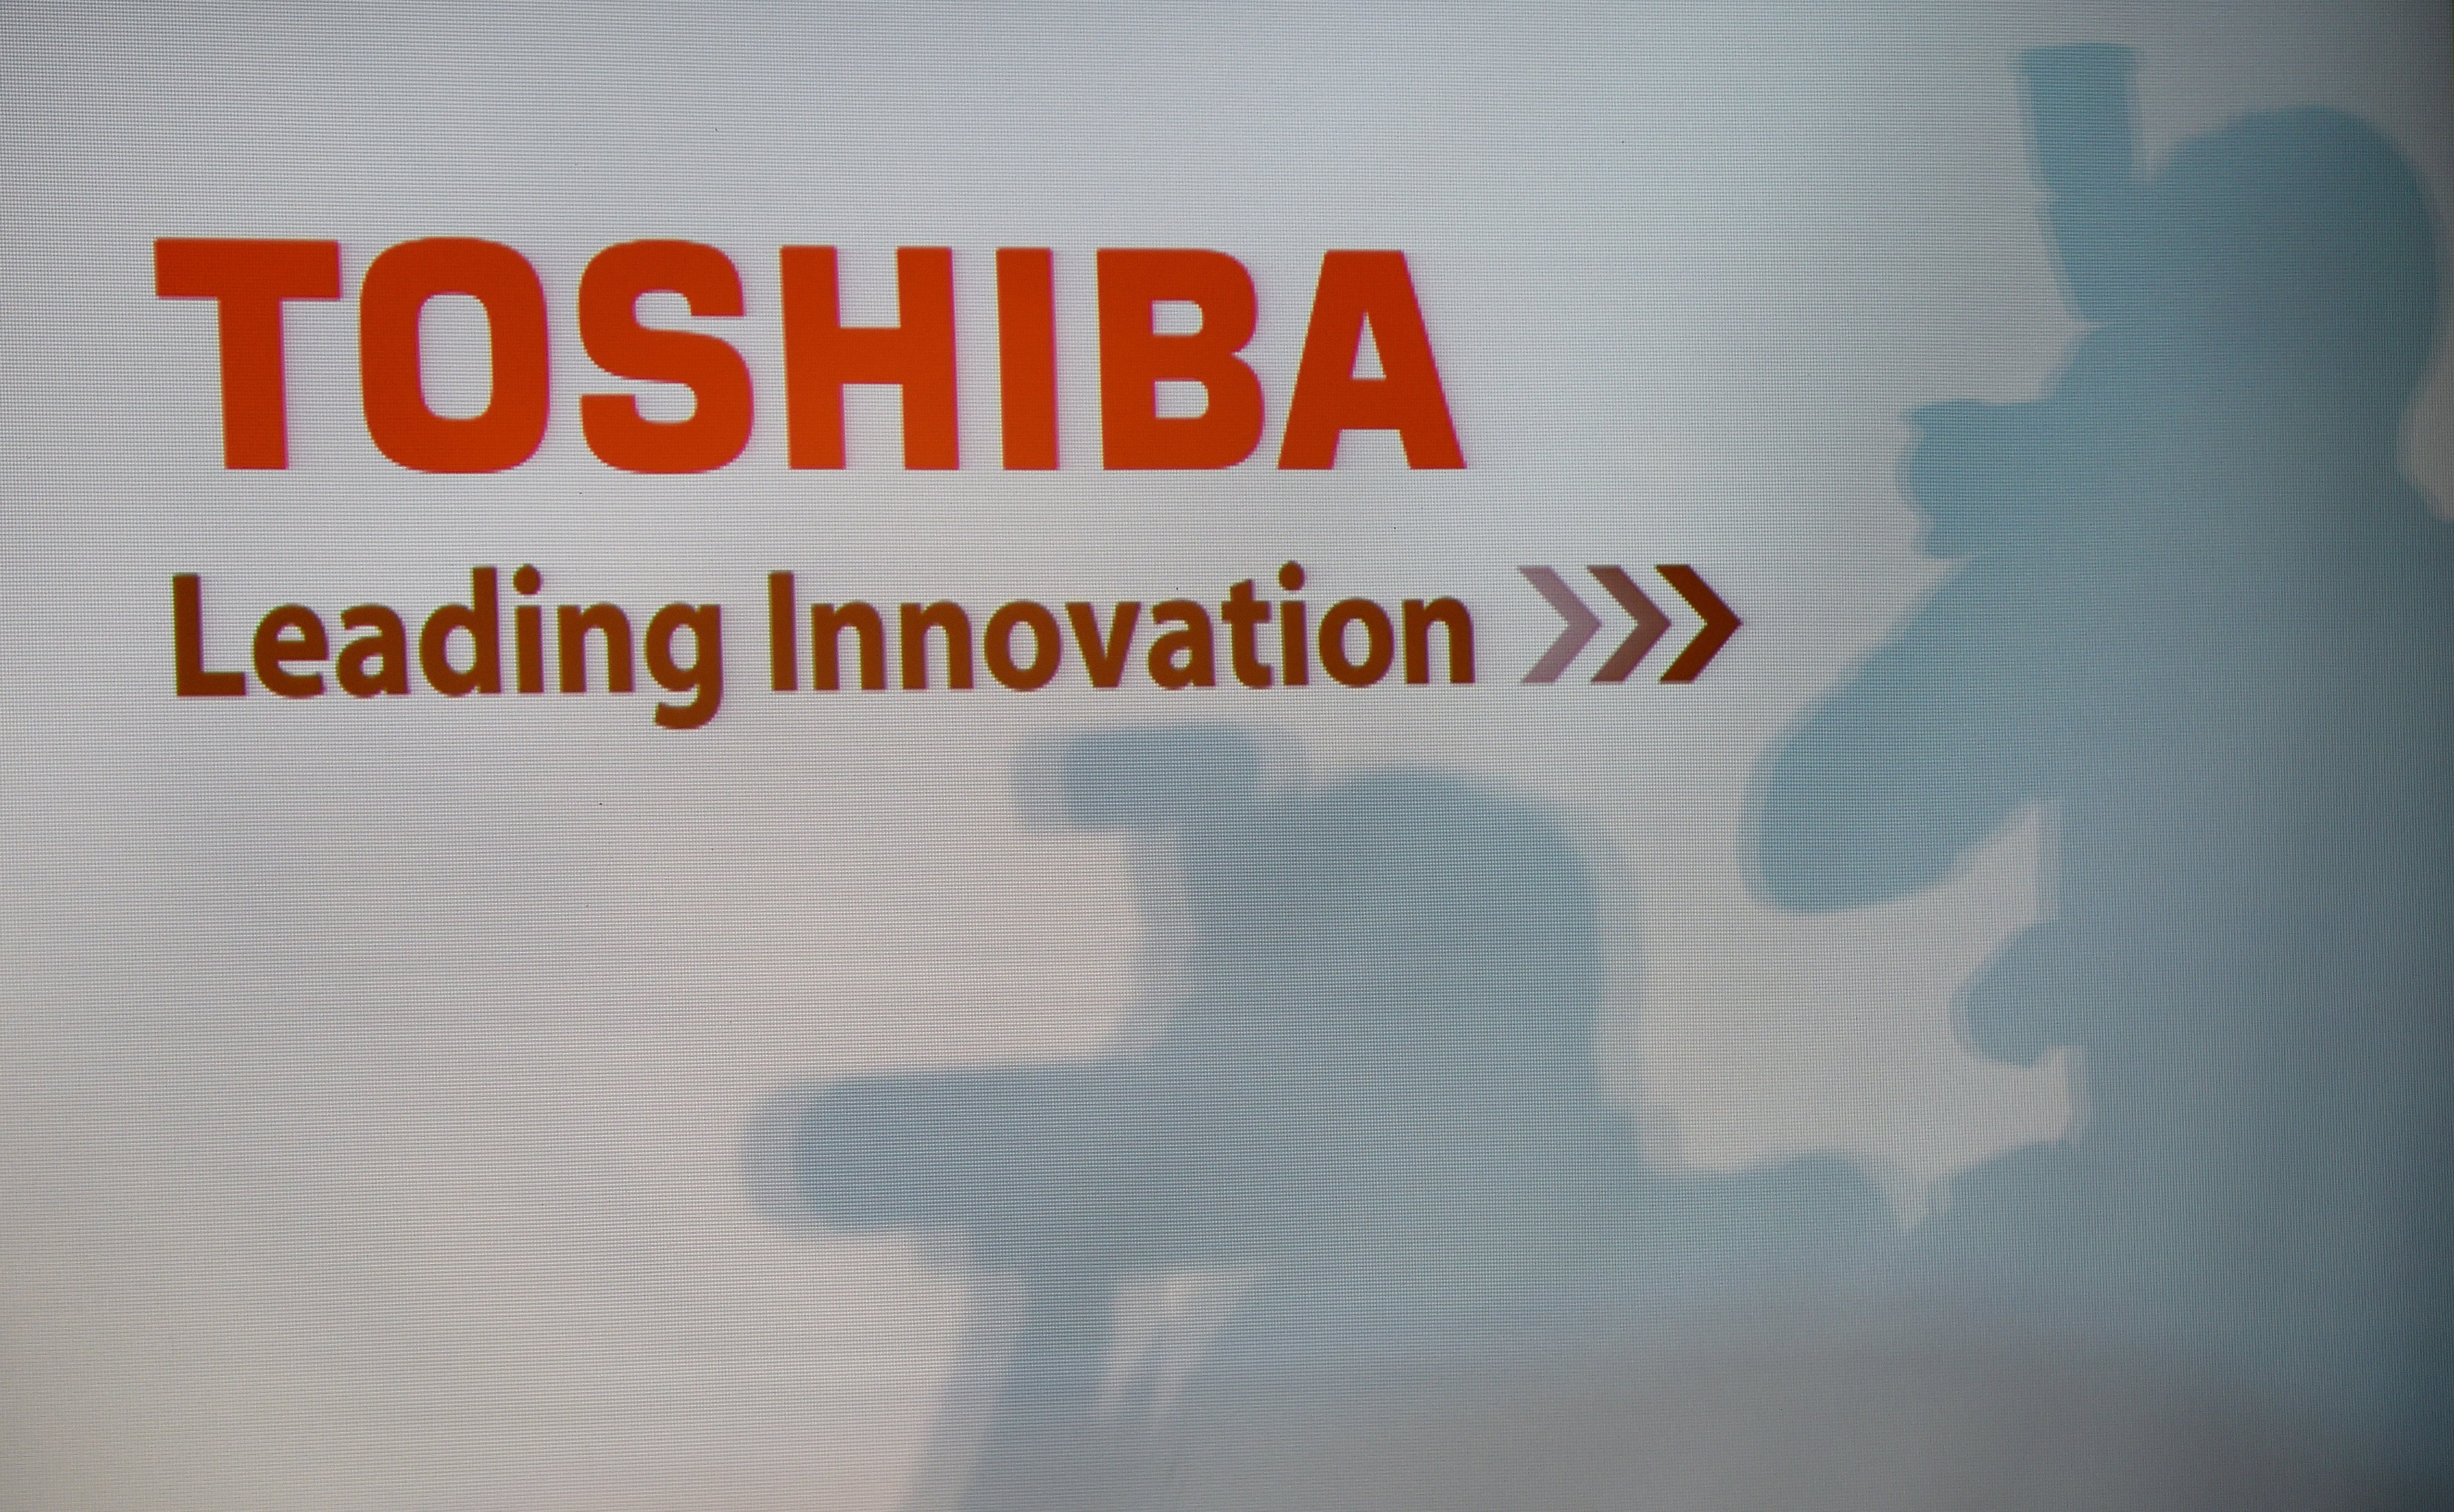 A Toshiba logo is seen during a press conference at their headquarters in Tokyo on December 21, 2015. Scandal-hit conglomerate Toshiba warned on December 21 it expects to post a record annual loss of 4.5 billion USD and slash thousands of jobs, as shares in the firm plunged nearly 10 percent.     AFP PHOTO / Toru YAMANAKA / AFP PHOTO / TORU YAMANAKA